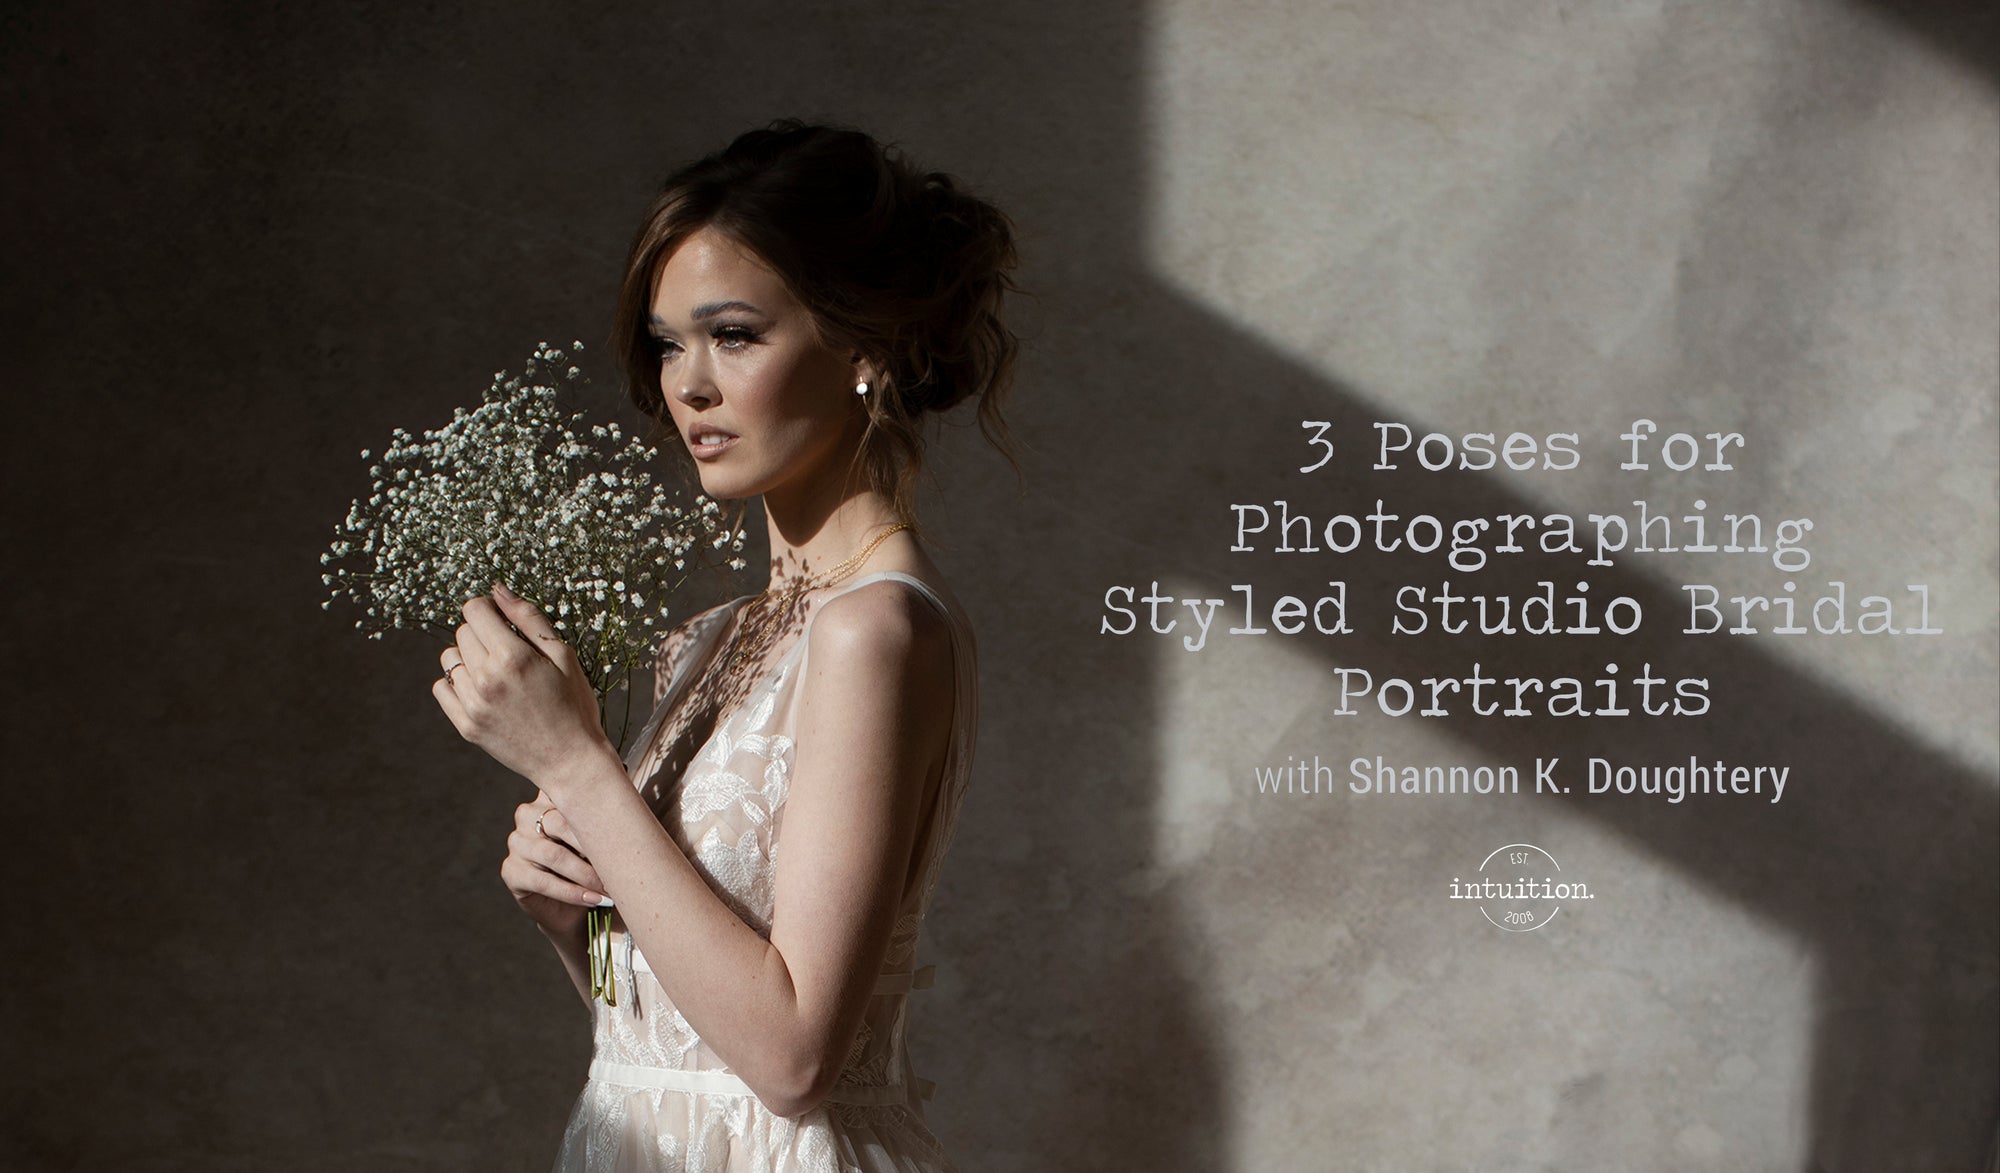 3 Poses for Photographing Styled Studio Bridal Portraits with Shannon K. Dougherty